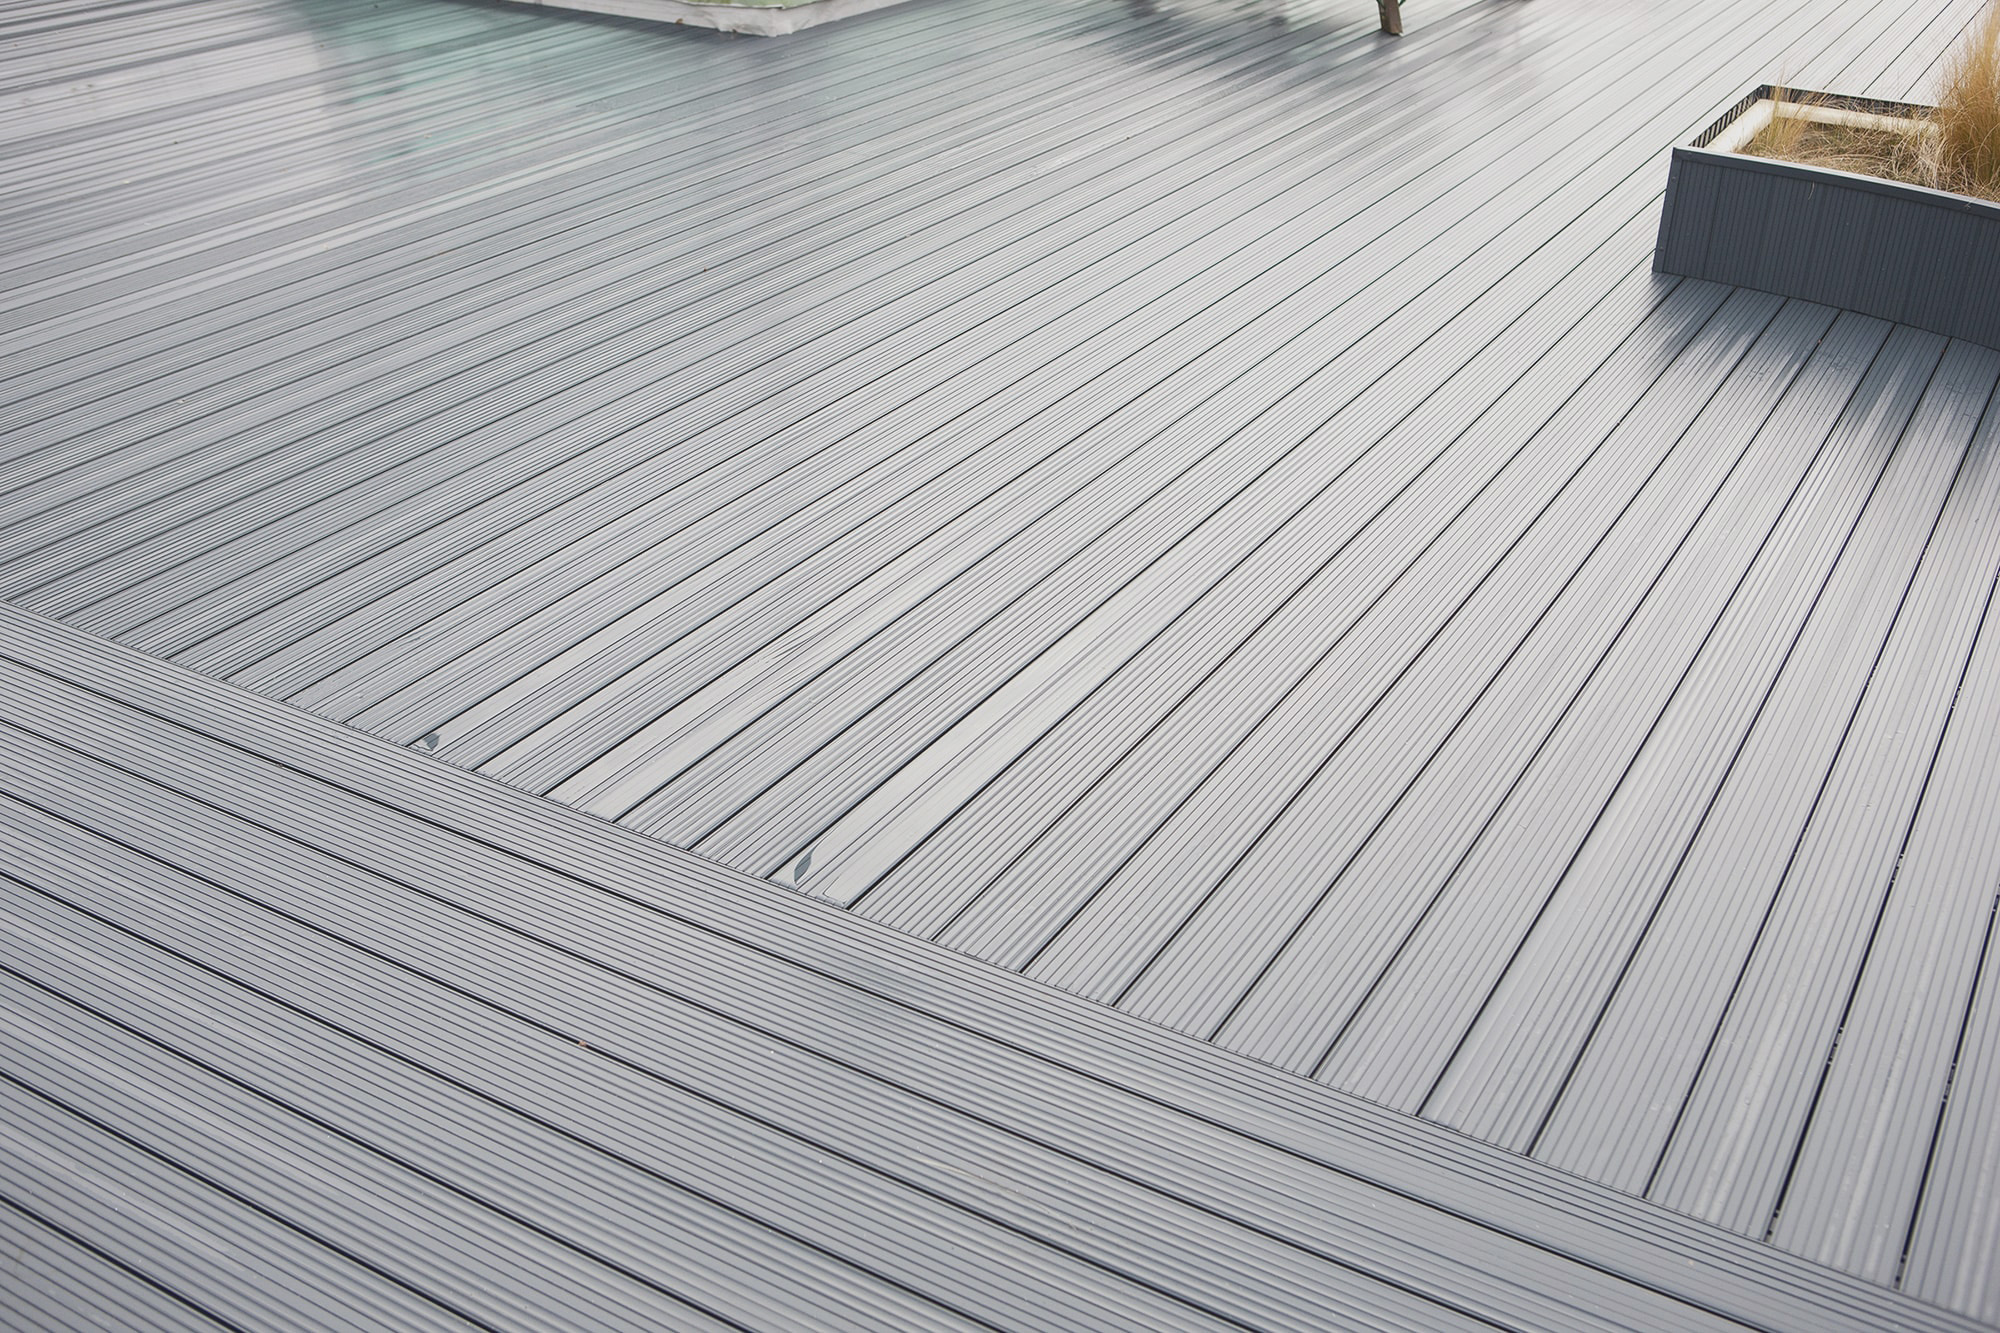 AliDeck Aluminium Decking Roof Terrace Replacement, Project Success Built-In